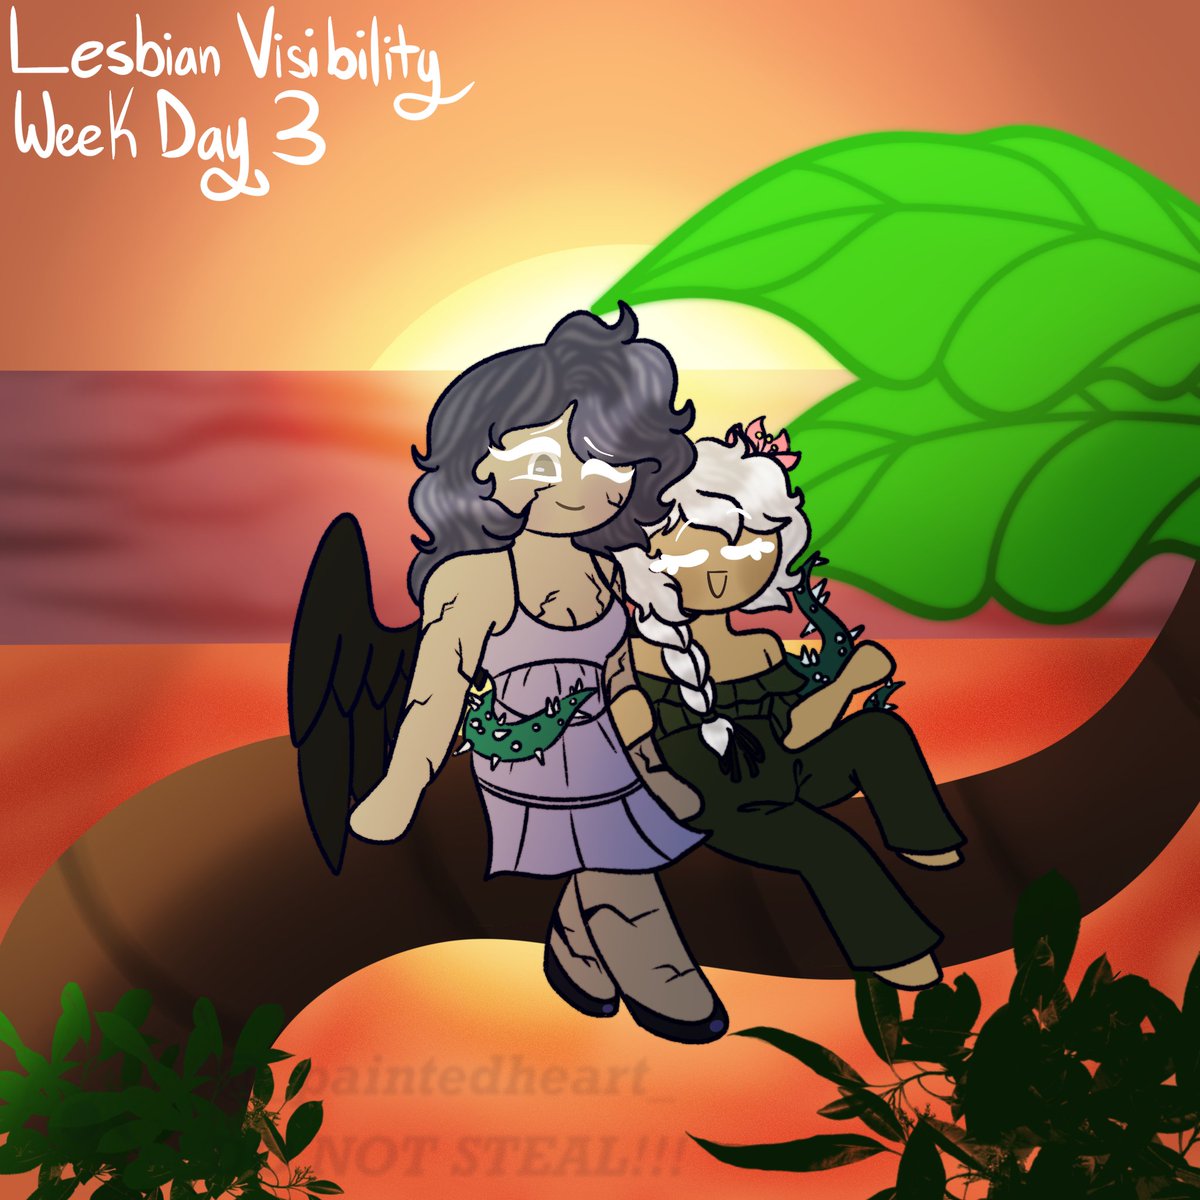 Thought I'd show off my #lesbianvisibilityweek drawings!
First two are ships of characters from some stories I have made (one being co-owned with a moot) and the last being cookie run OC stuff :)
Ozymandeus belongs to @xios_scribbles !
#oc #originalcharacter #cookierunoc